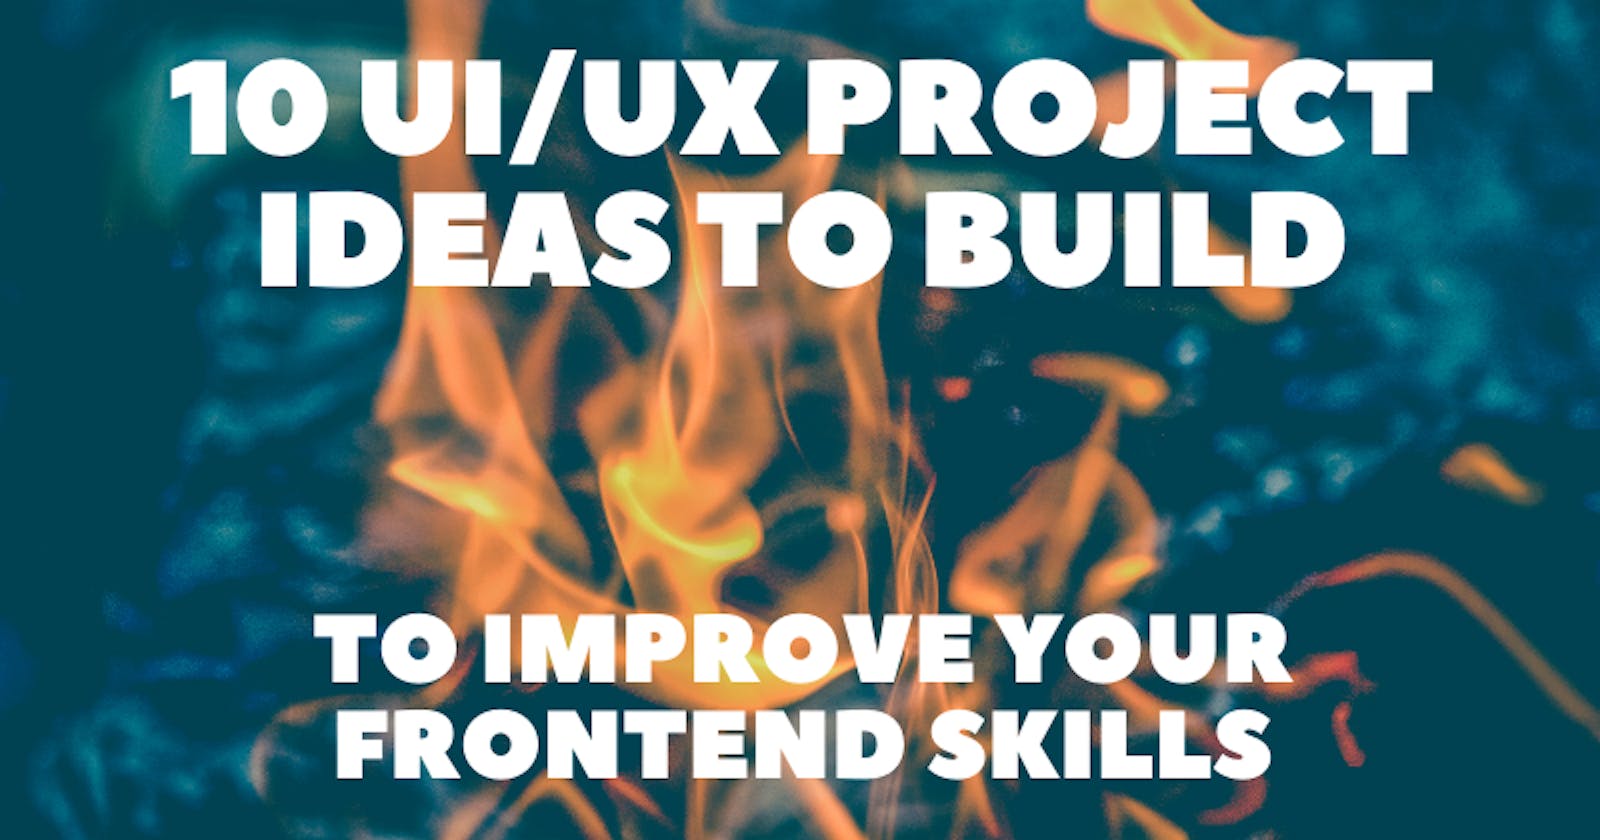 10 UI/UX Project Ideas to Build to Improve Your Frontend Skills 🎨🧙‍♂️